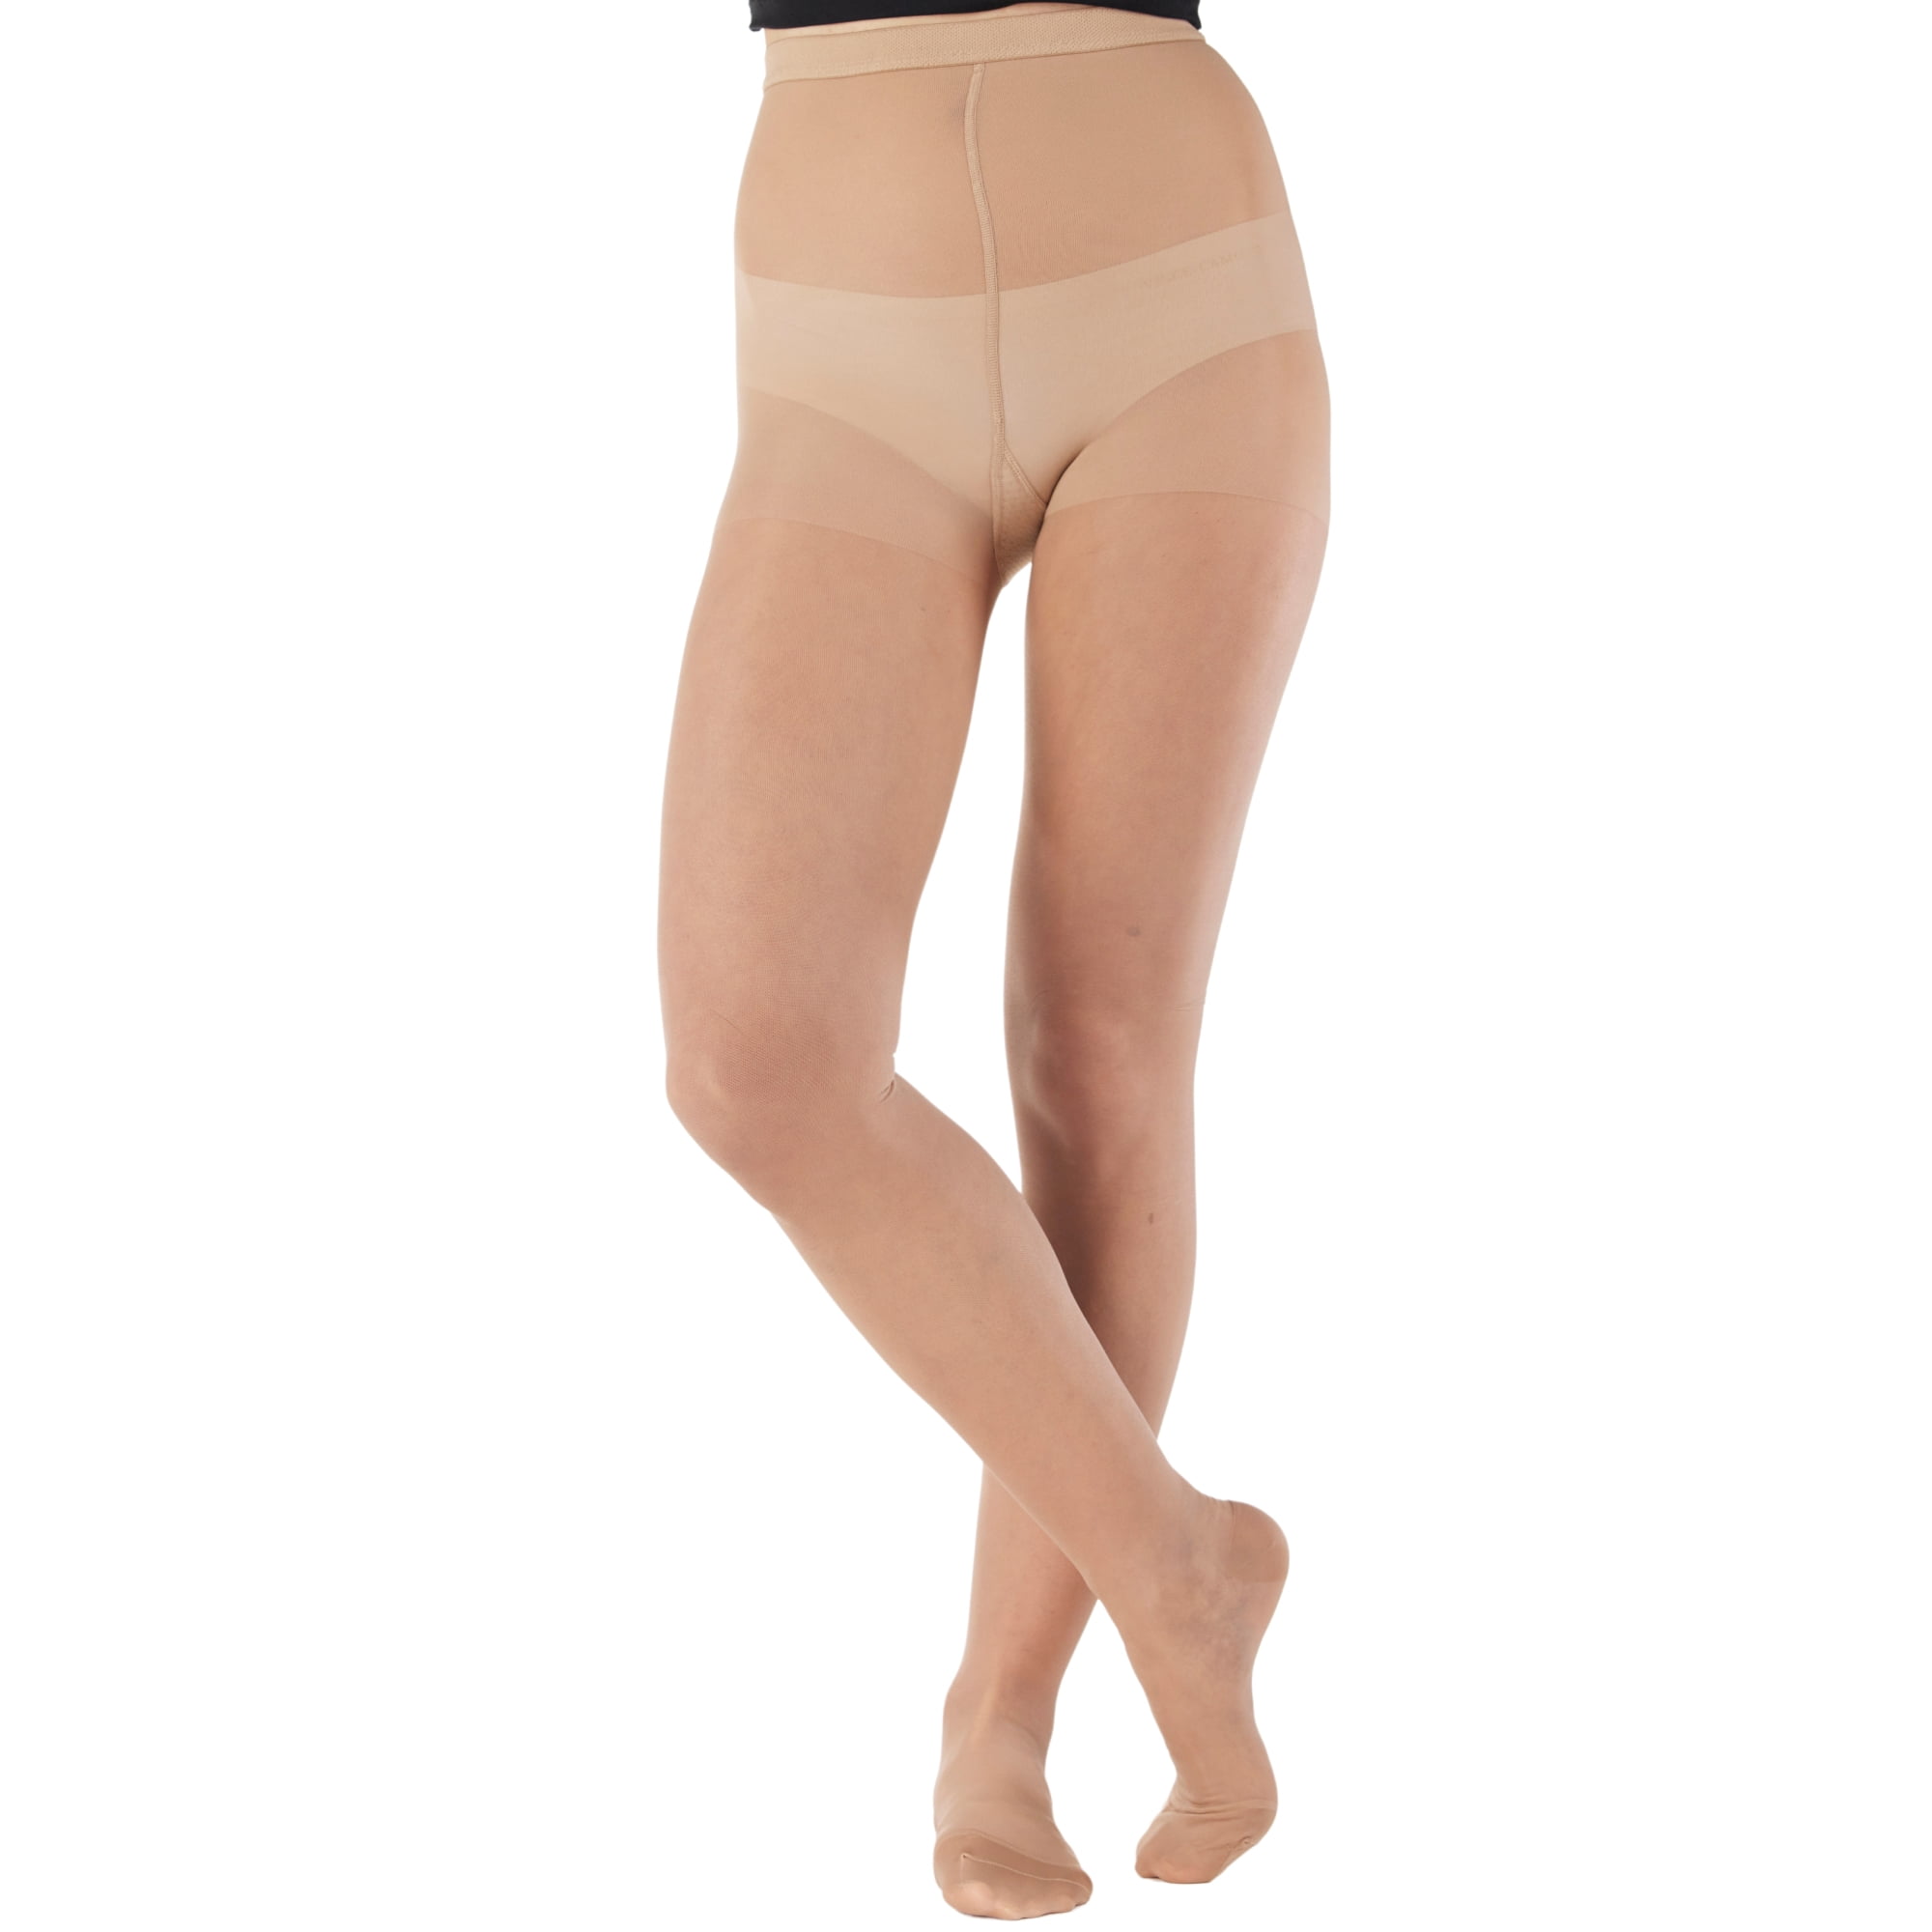 L'eggs, Accessories, Leggs Sheer Energy Preloved Off Black Nude Size Q  Sheer To Waist Pantyhose